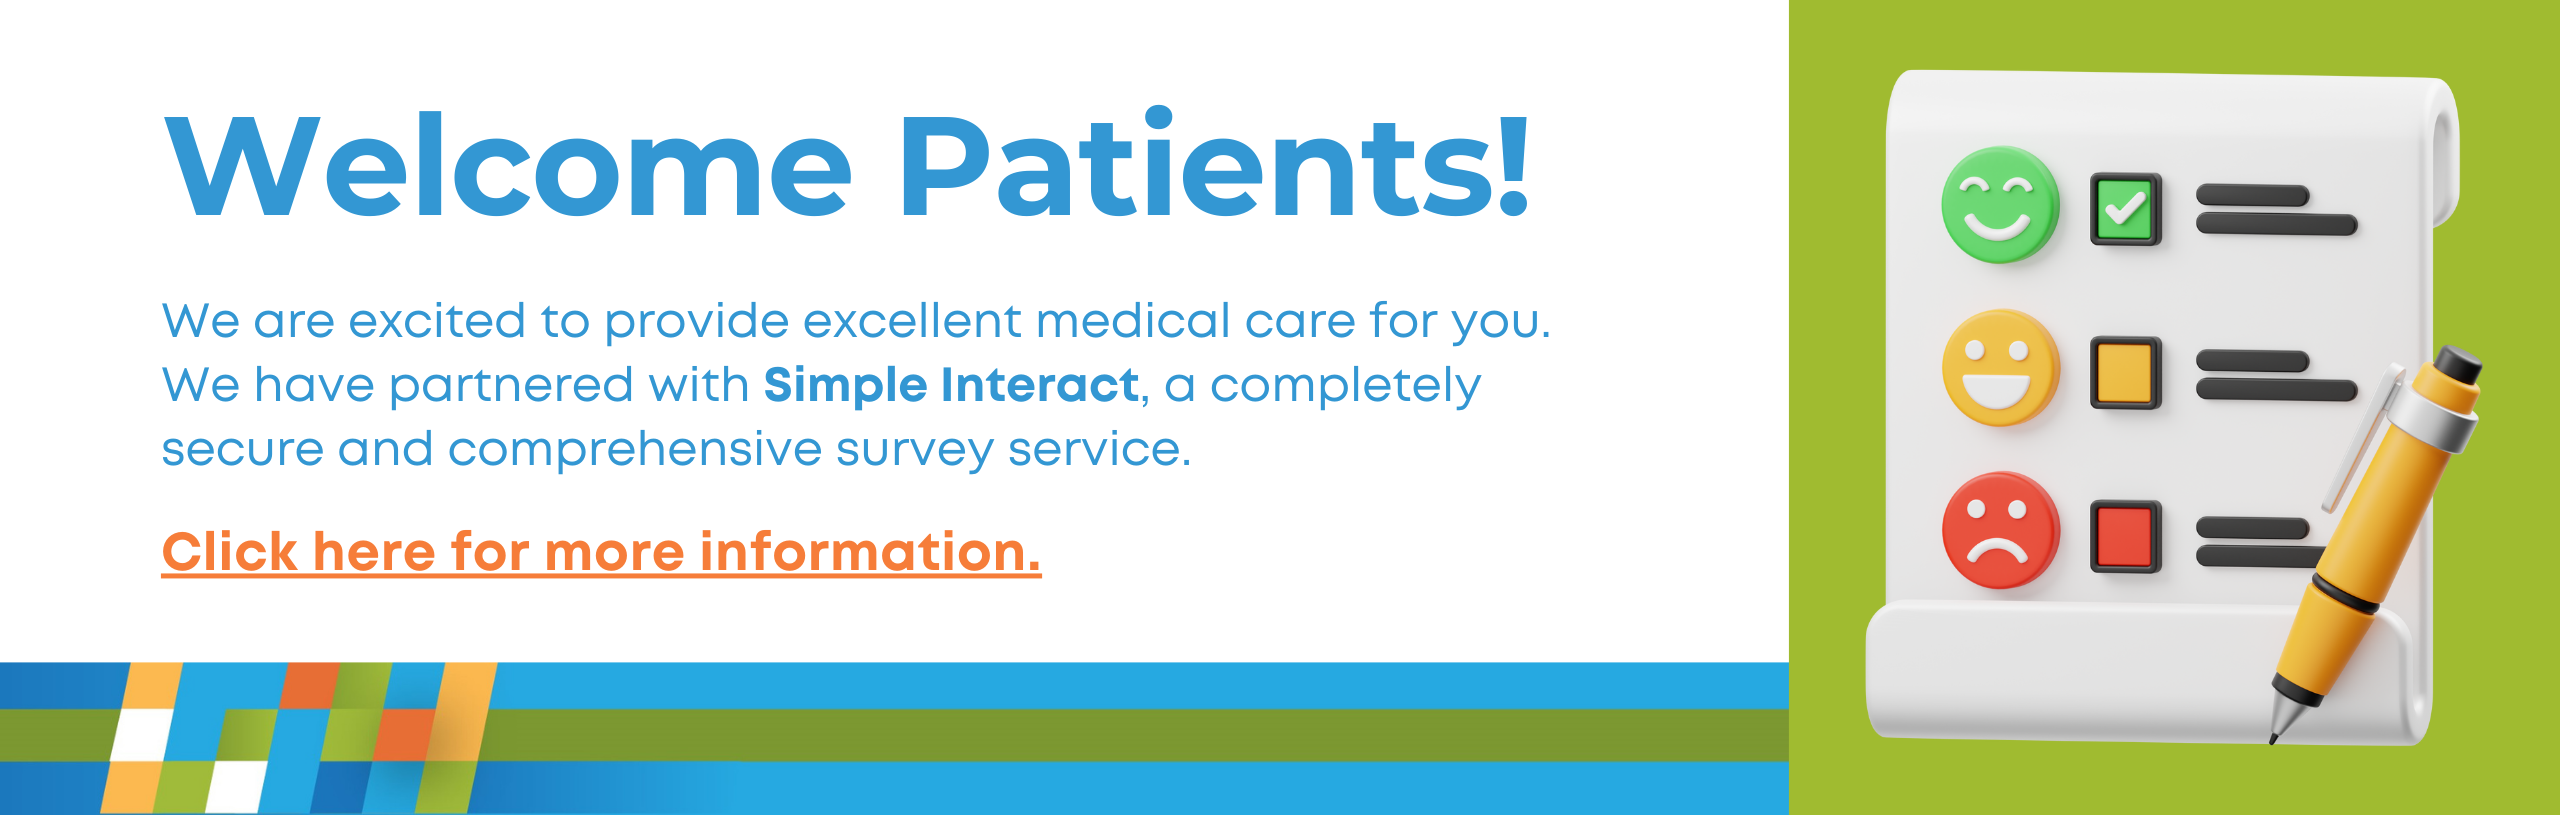 Welcome Patients!

We are excited to provide excellent medical care for you. We have partnered with Simple Interact, a completely secure and comprehensive survey service.

Click here for more information.